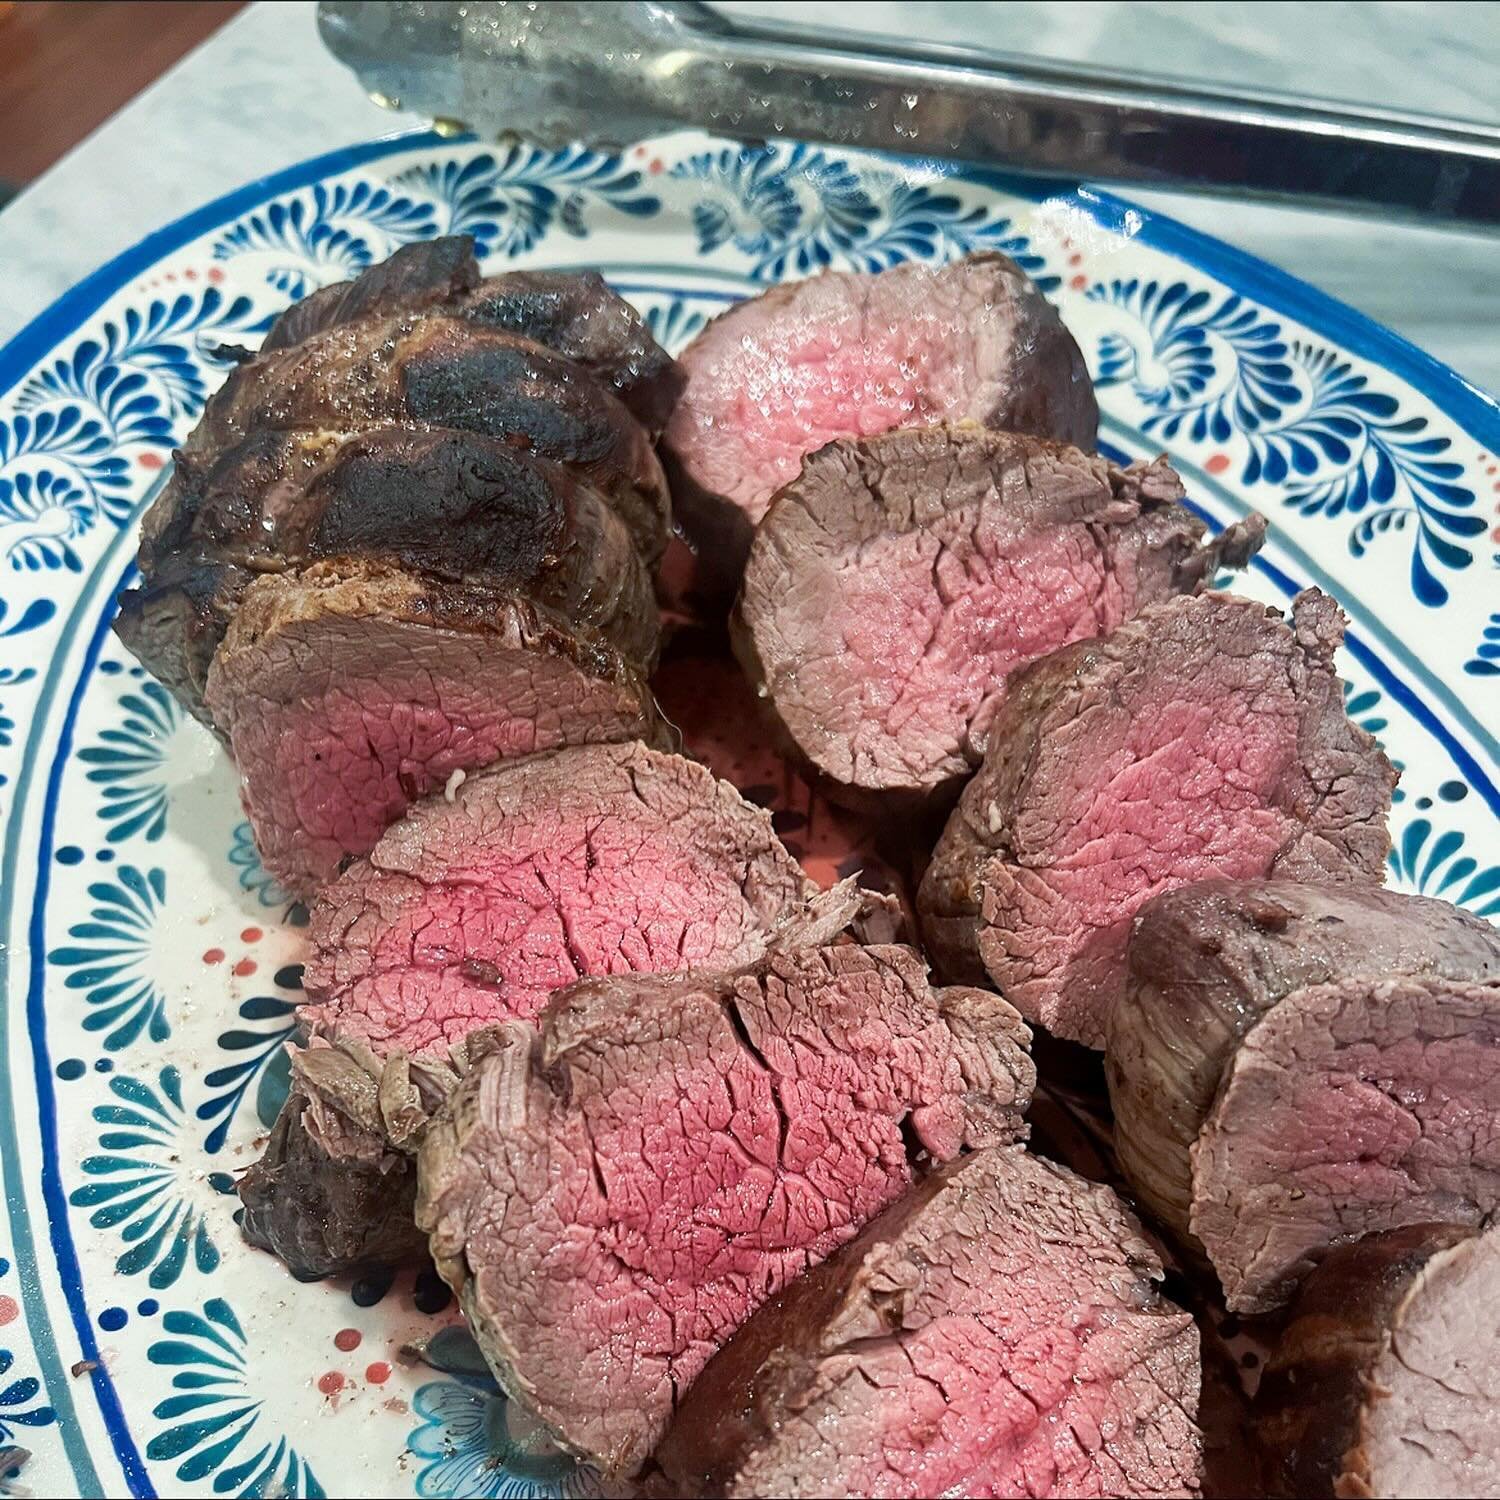 If you&rsquo;ve got creamy horseradish on hand, the next obvious play is to make a beef tenderloin, no?

full recipe on lindsayEats.com
link in bio @_lindsayeats_ 

#beef #meat #tenderloin #beeftenderloin #filet #filetmignon #roast #aujus #jus #dinne